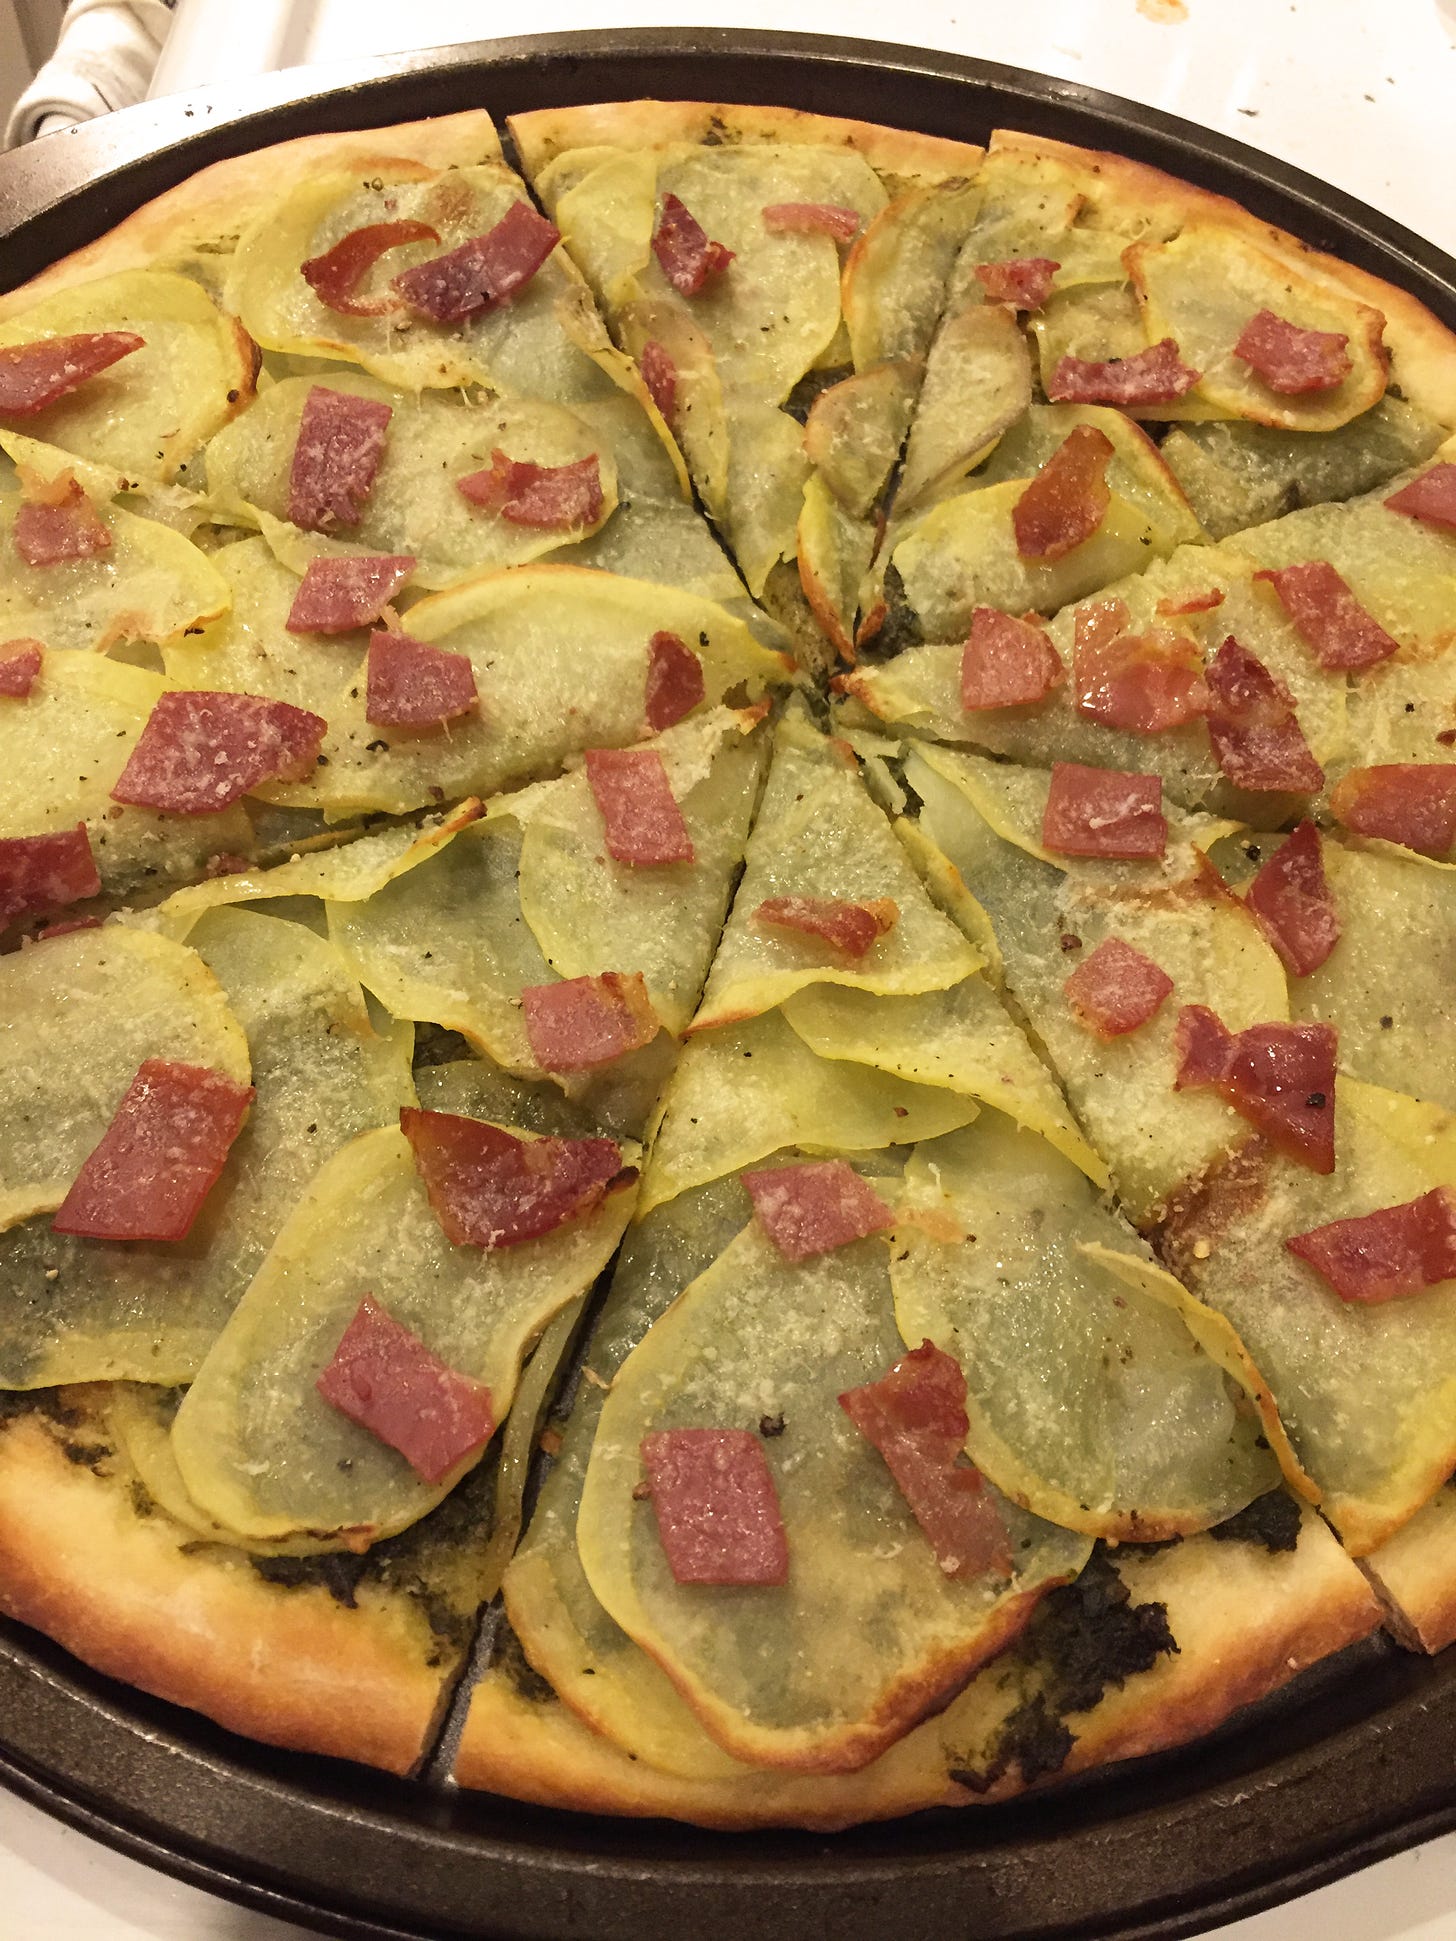 a pizza covered in thin slices of potato and diced prosciutto. Beneath the potatoes, a base of pesto is just visible.